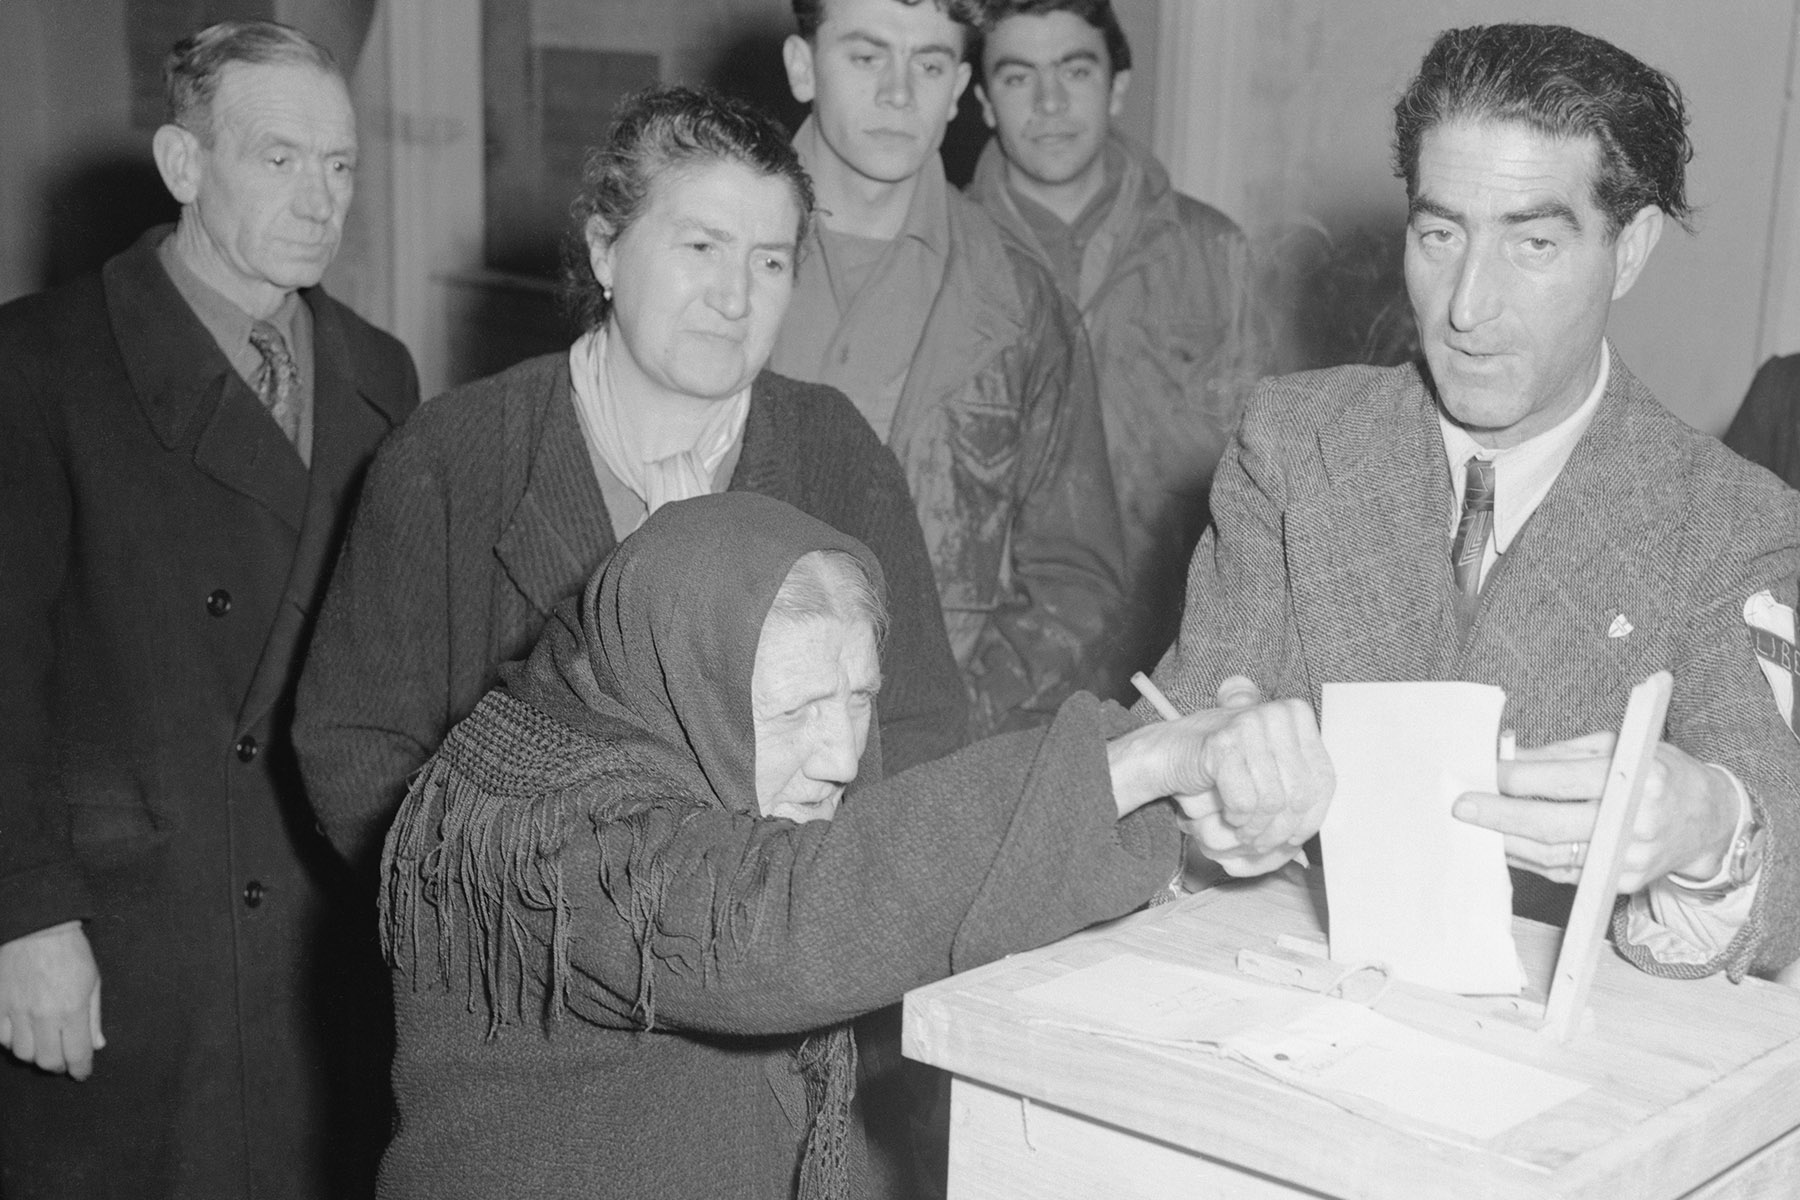 82-year old Maria Castaldo is assisted by clerk, as she casts her vote for the first time in her life, in the referendum to overthrow the Fascist government in Italy.